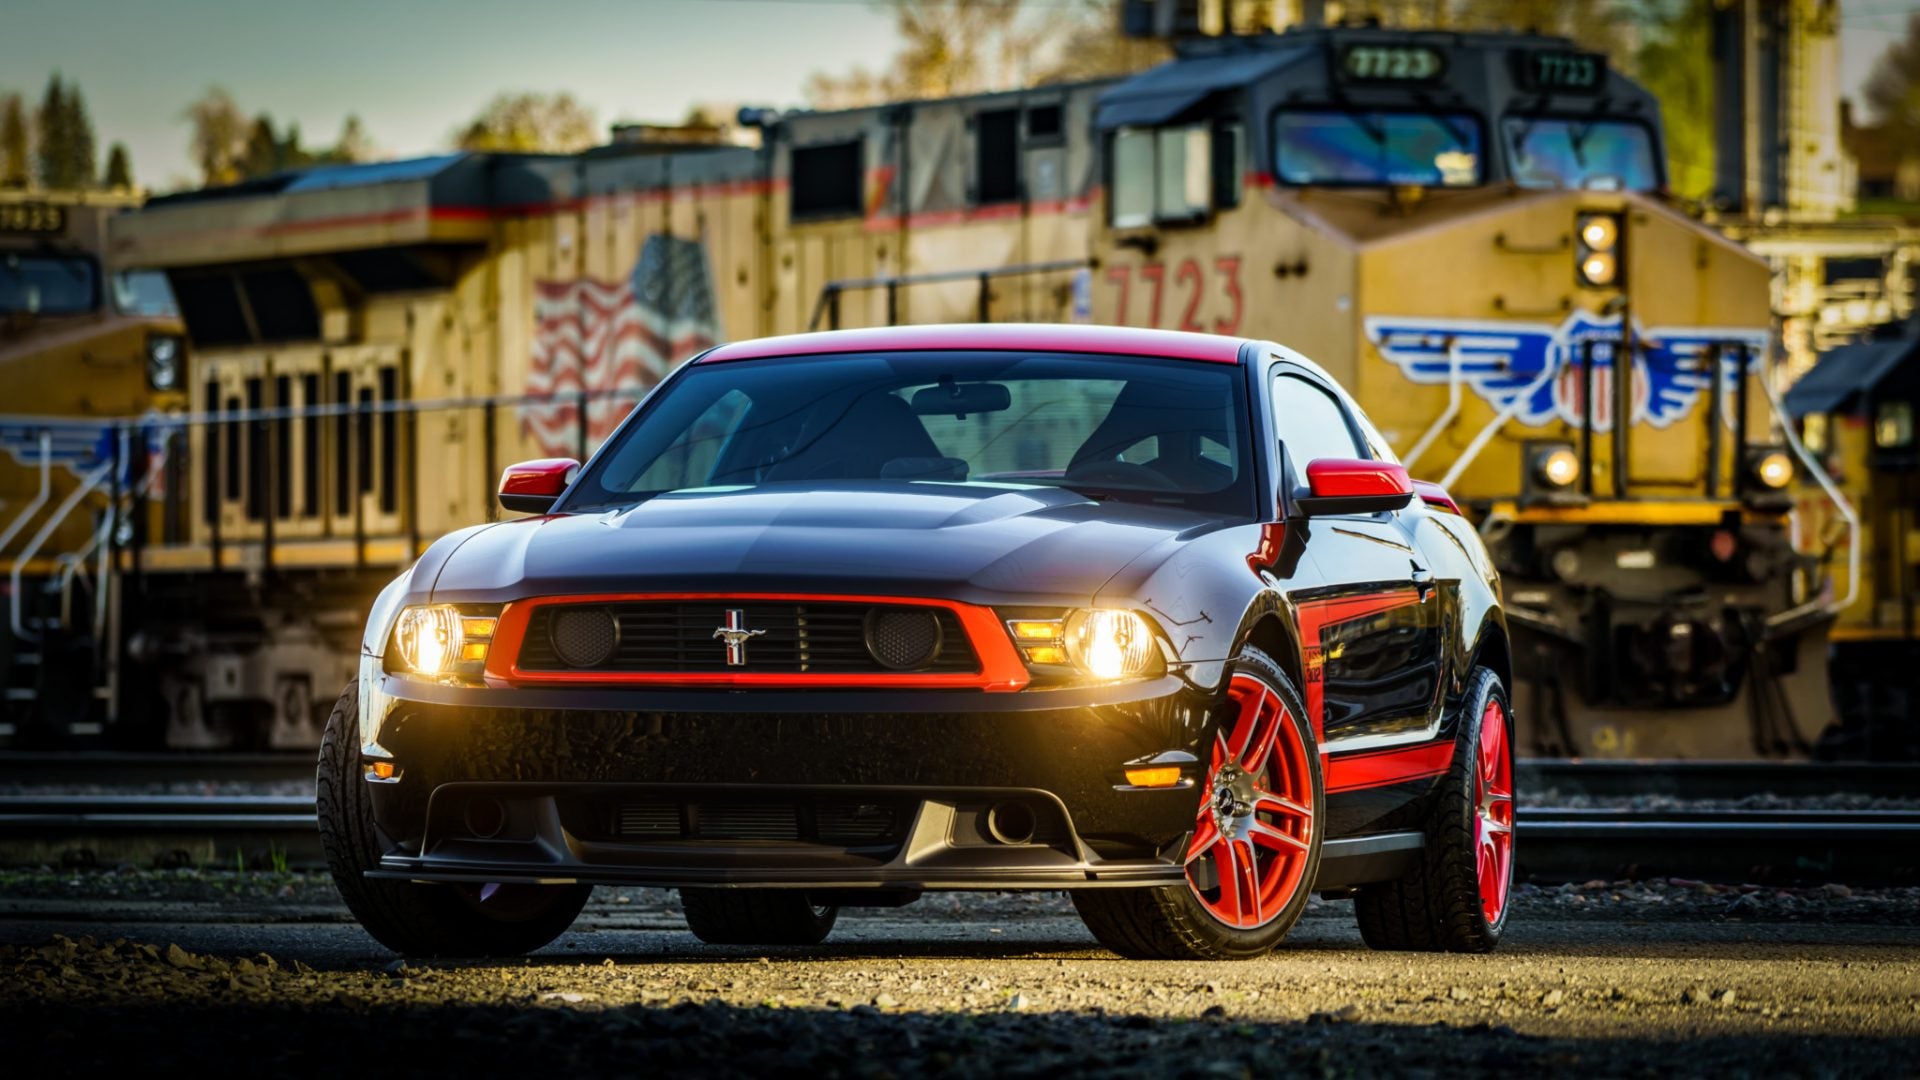 Rare 2012 Ford Mustang Boss 302 Laguna Seca With 1,200 Miles Is Worthy of Second Mortgage